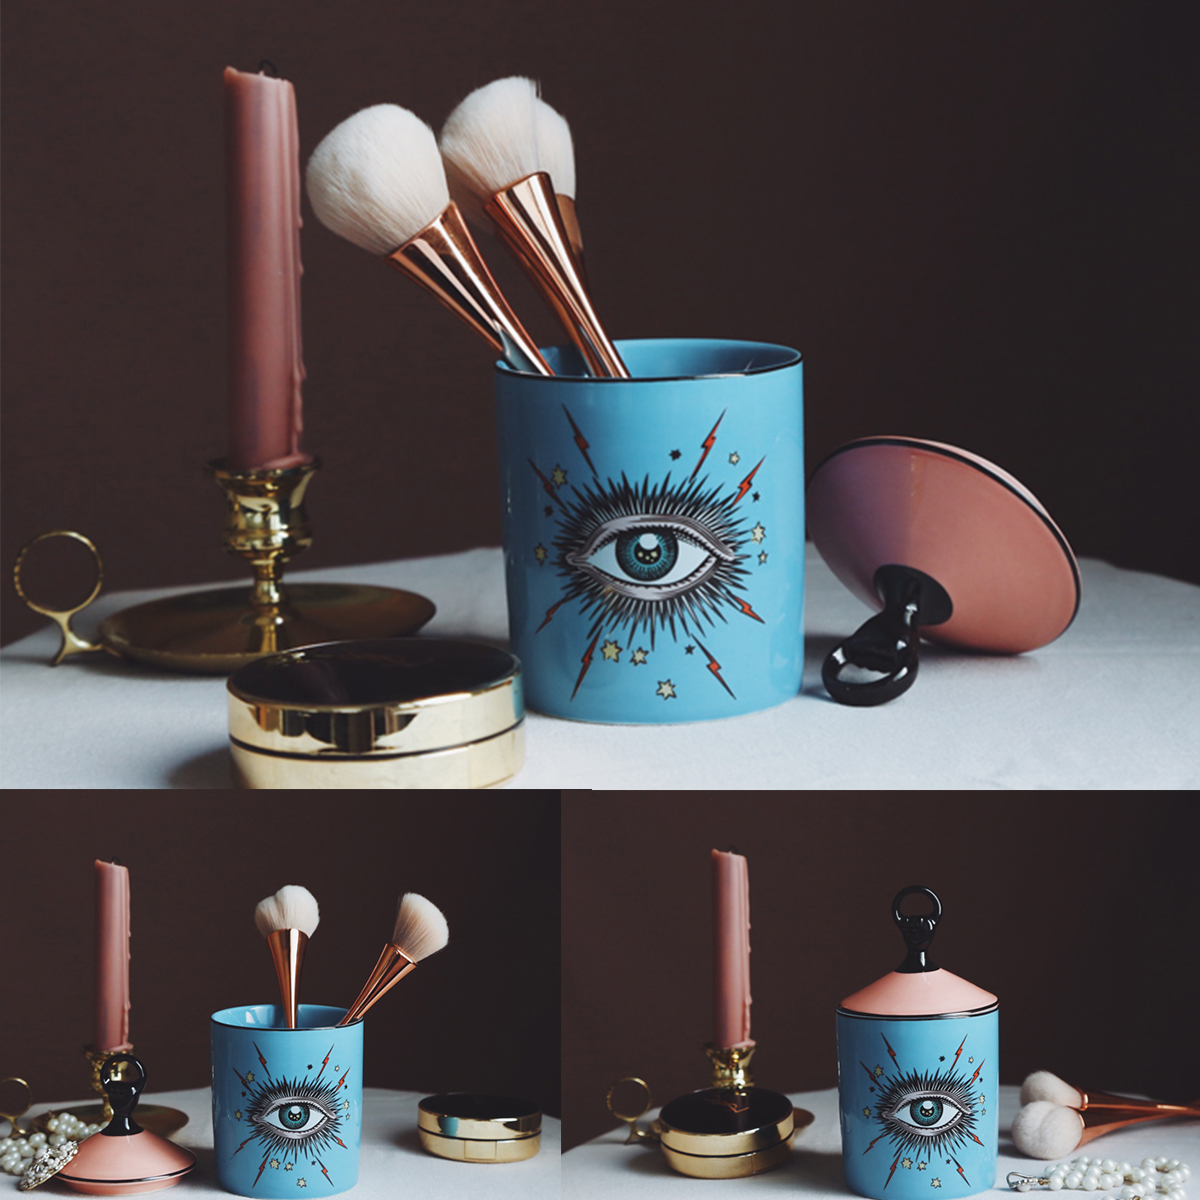 Big-Eyes-Jar-Hands-with-Ceramic-Lids-Decorative-Cans-Candle-Holders-Storage-Cans-Cosmetic-Storage-Ta-1649421-2